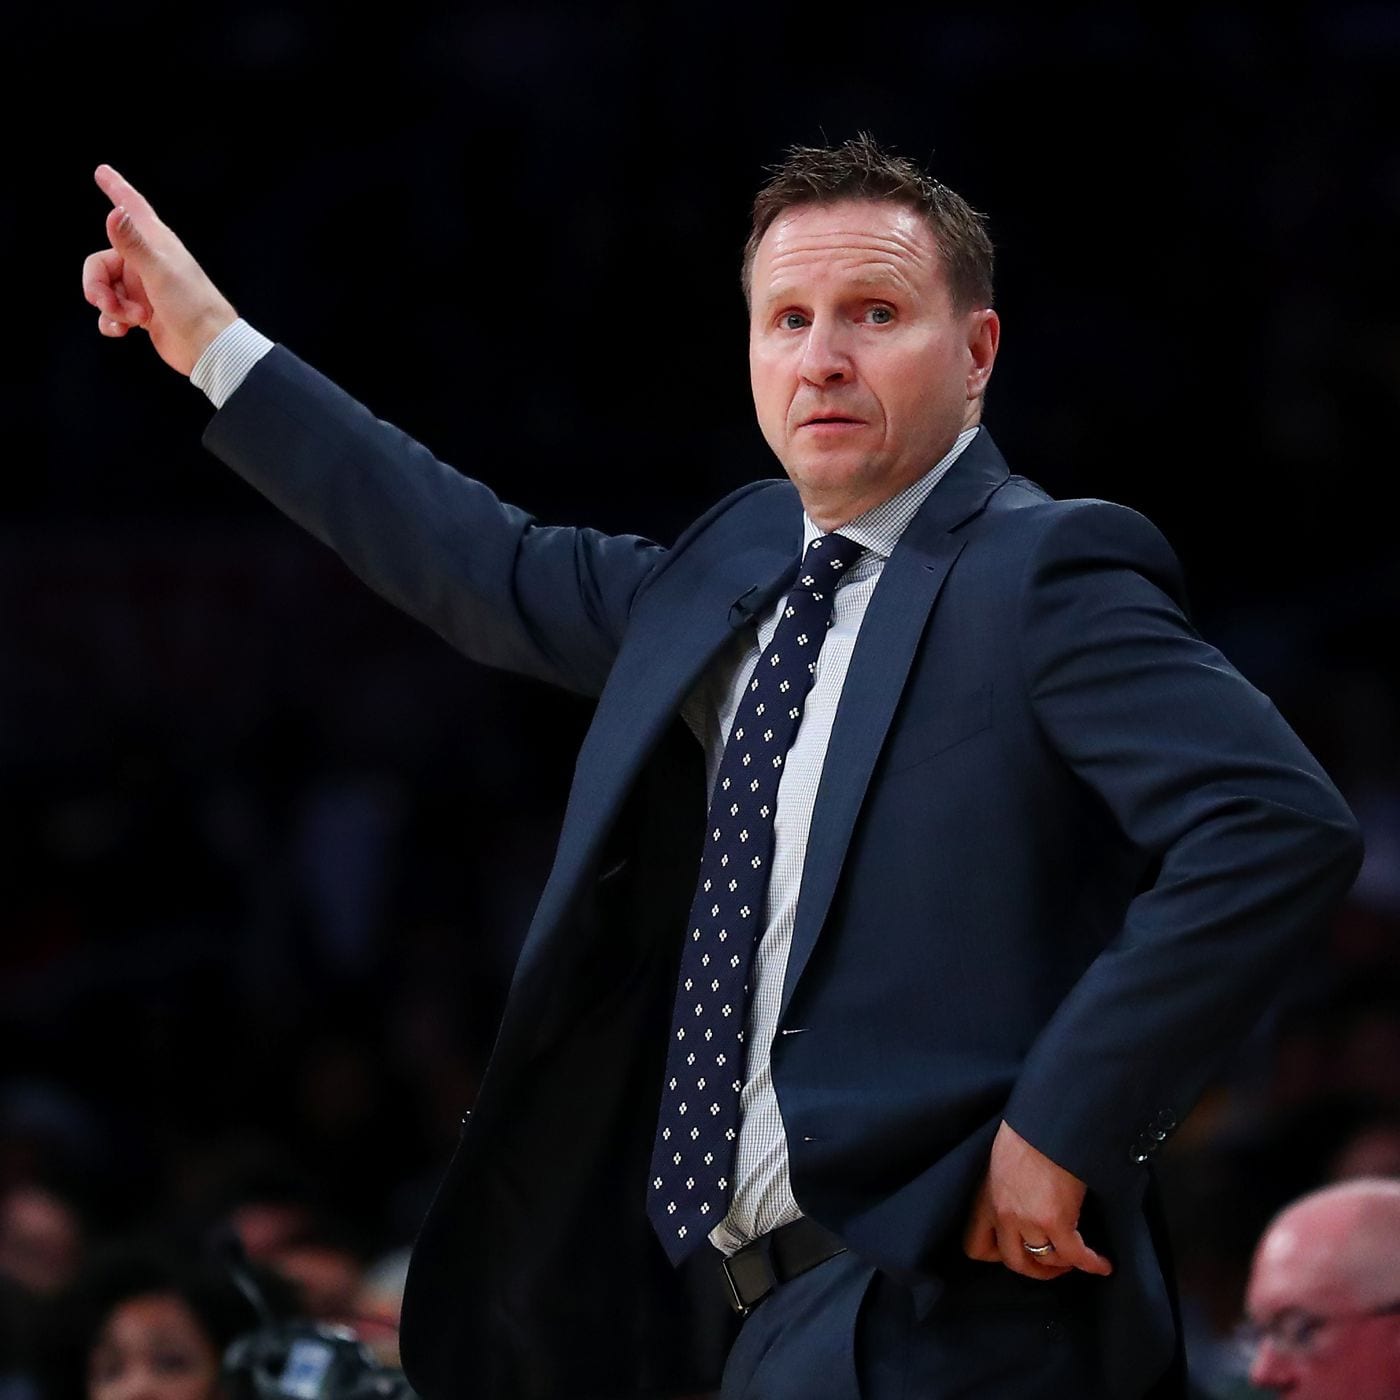 Portland Trail Blazers Finalizing Deal With Scott Brooks to Become Top Assistant Coach